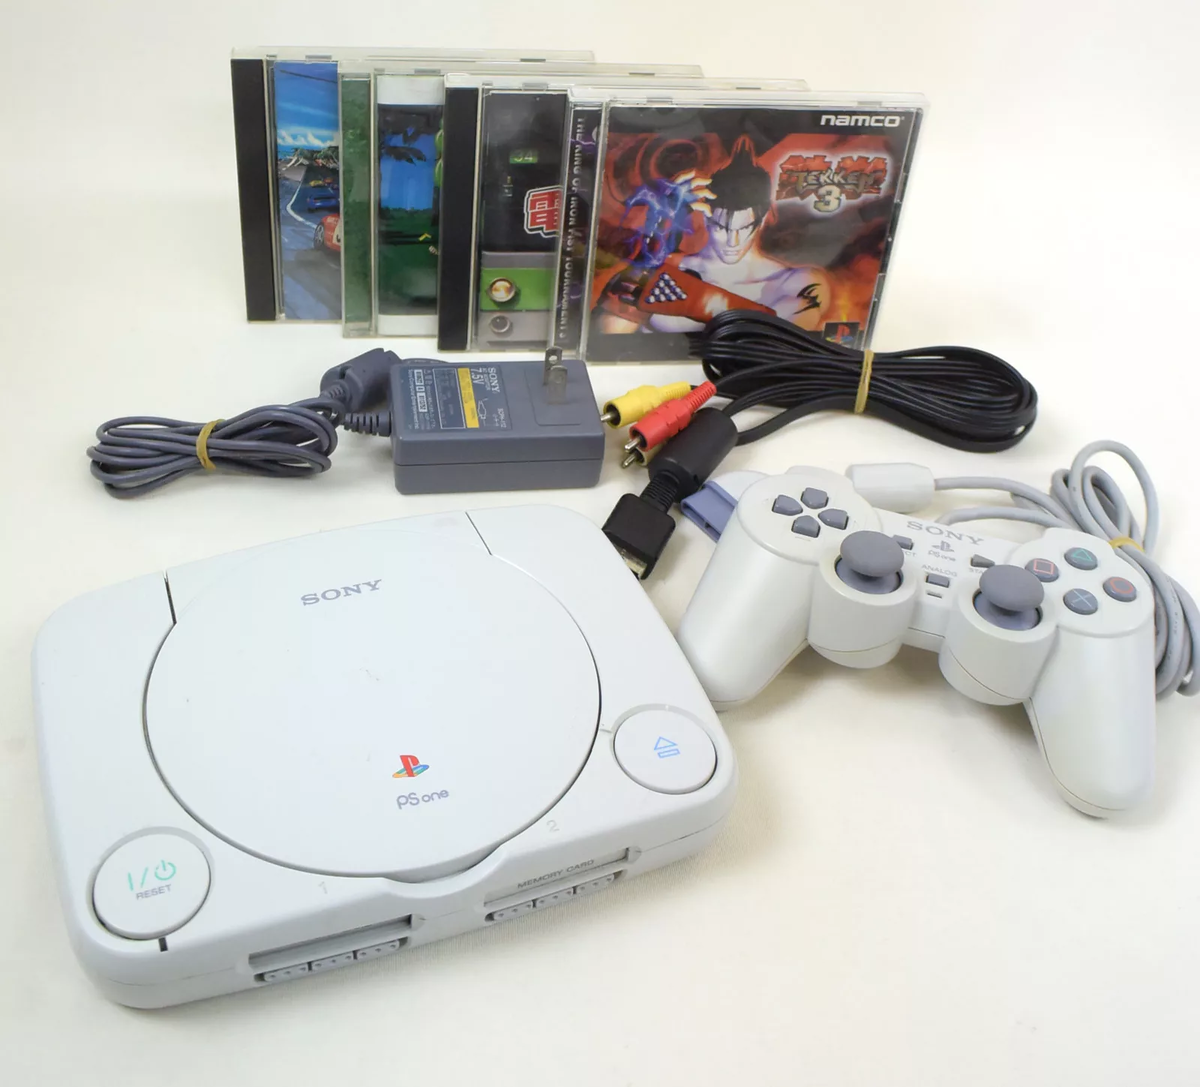 Sony playstation когда вышла. Sony ps1. Sony ps1 Slim. Sony PLAYSTATION ps1. Sony PLAYSTATION 1 ps1.